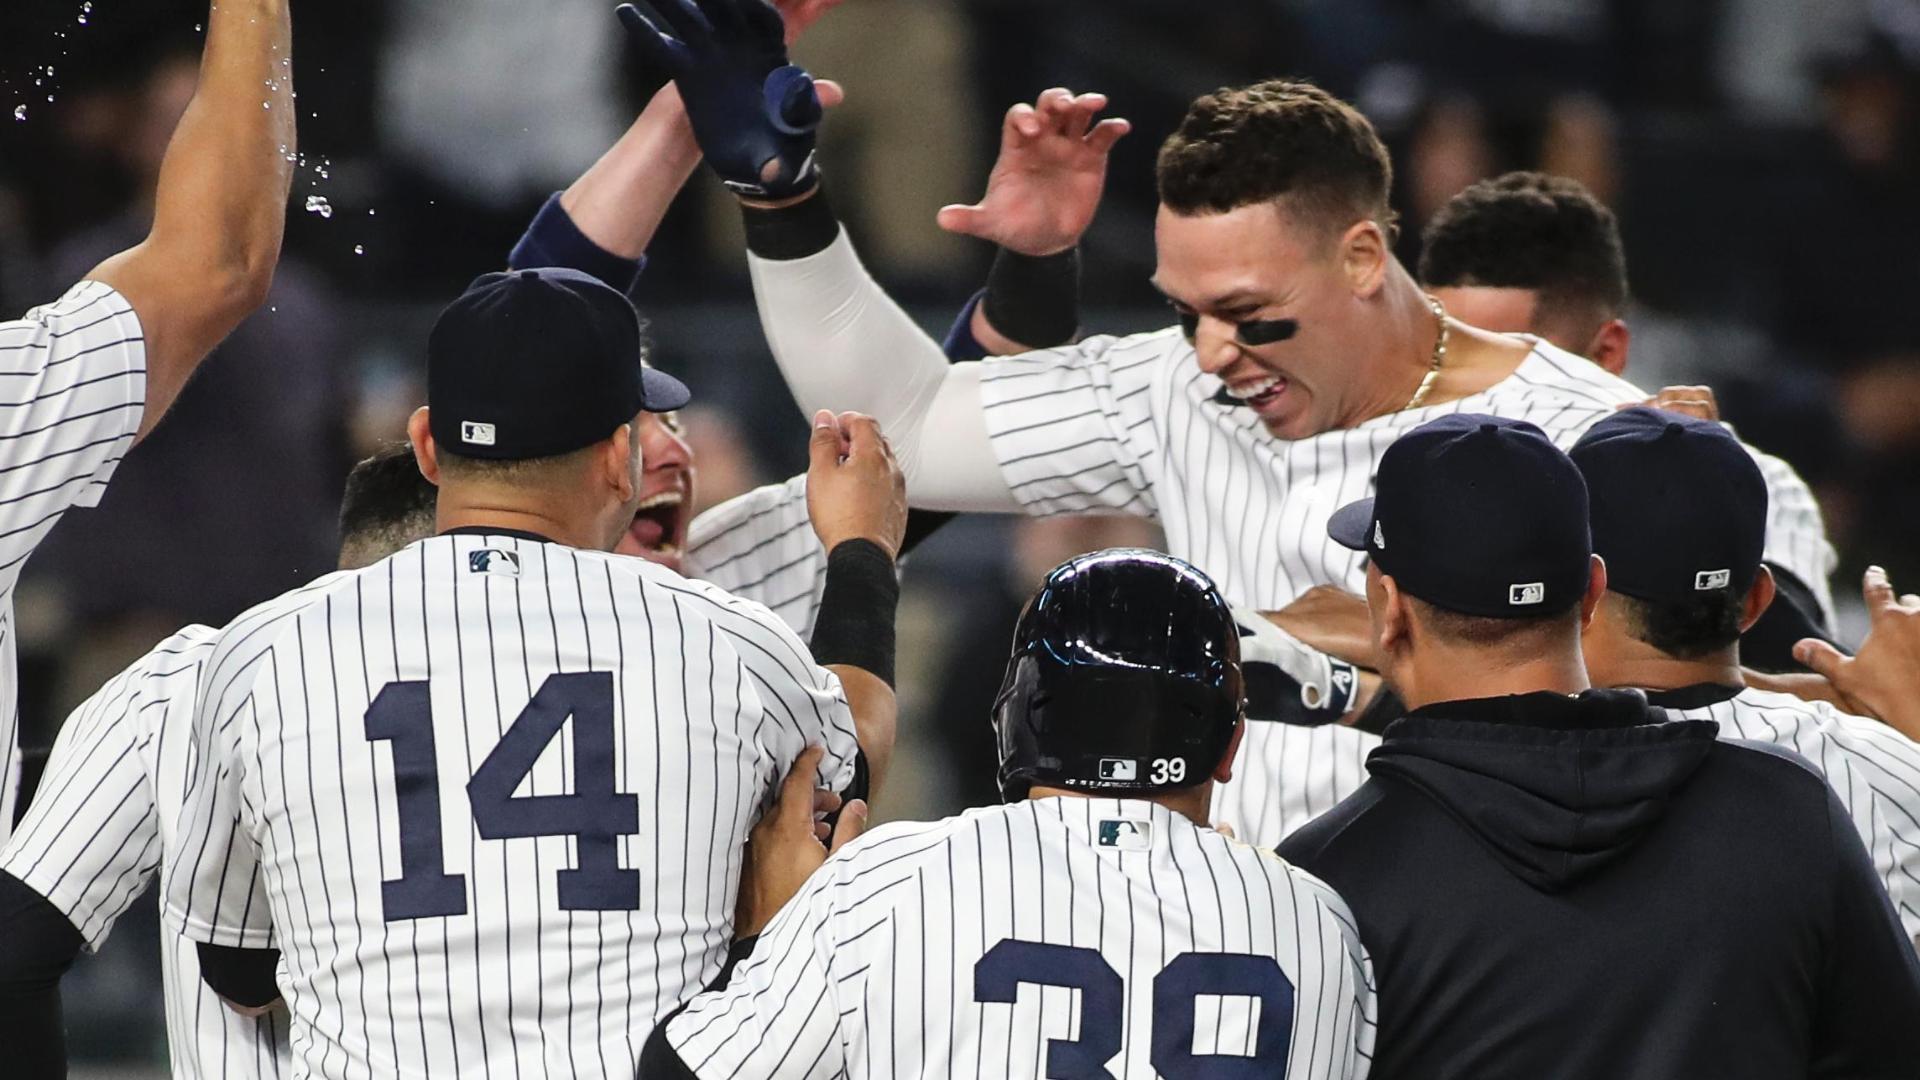 Judge hits 3-run HR in 9th to give Yanks 6-5 win over Jays - ABC7 New York